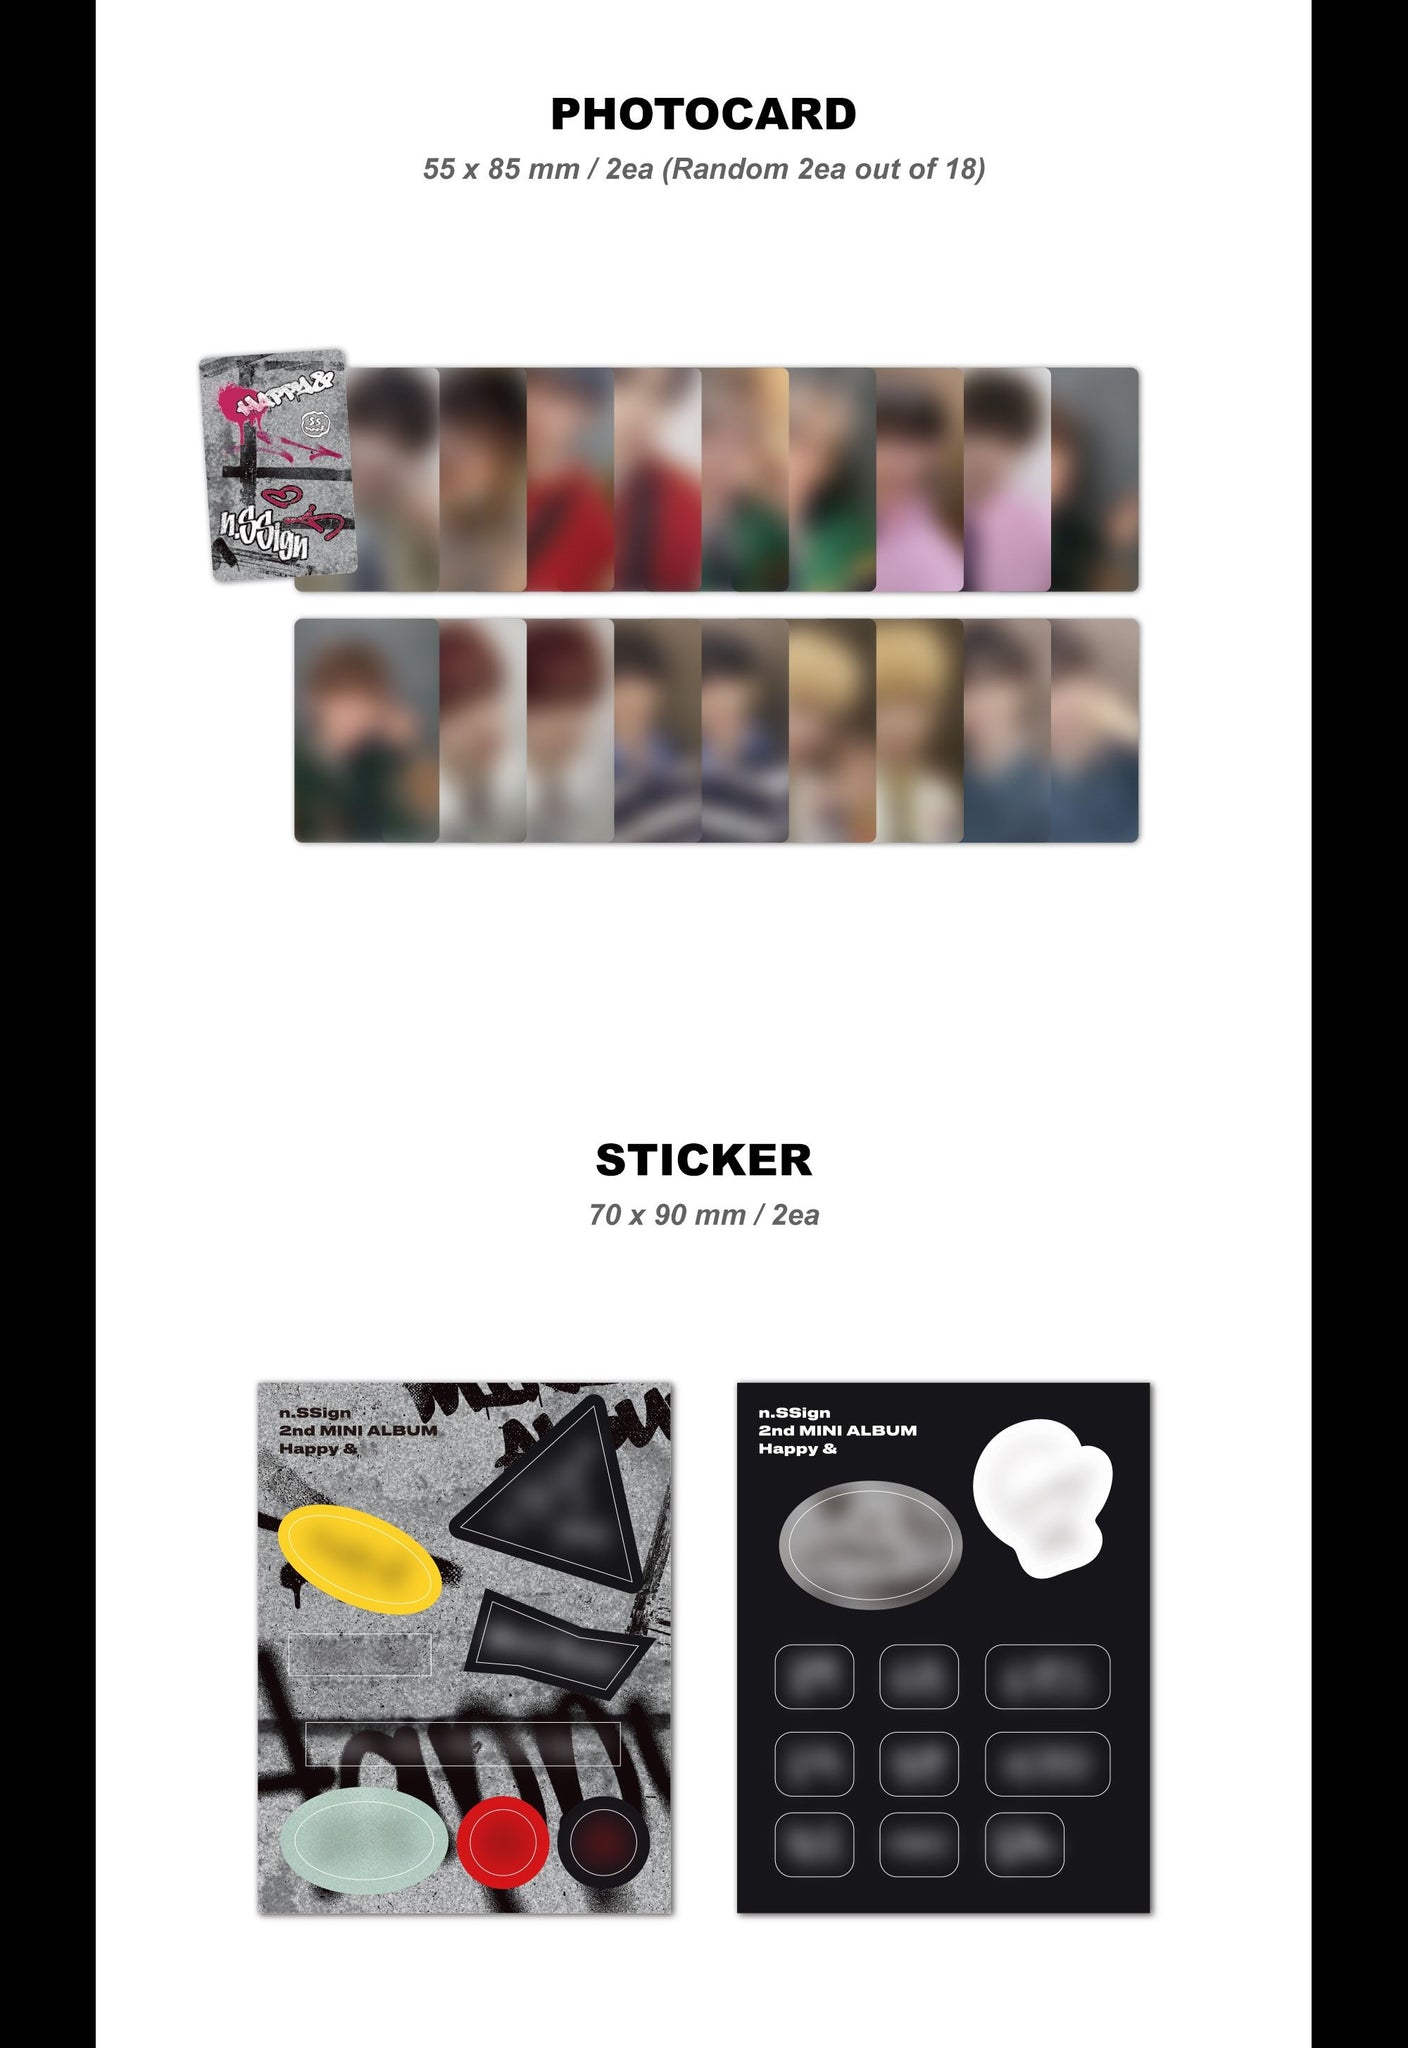 n.SSign 2nd Mini Album Happy & - POCA Version Inclusions Photocards Stickers